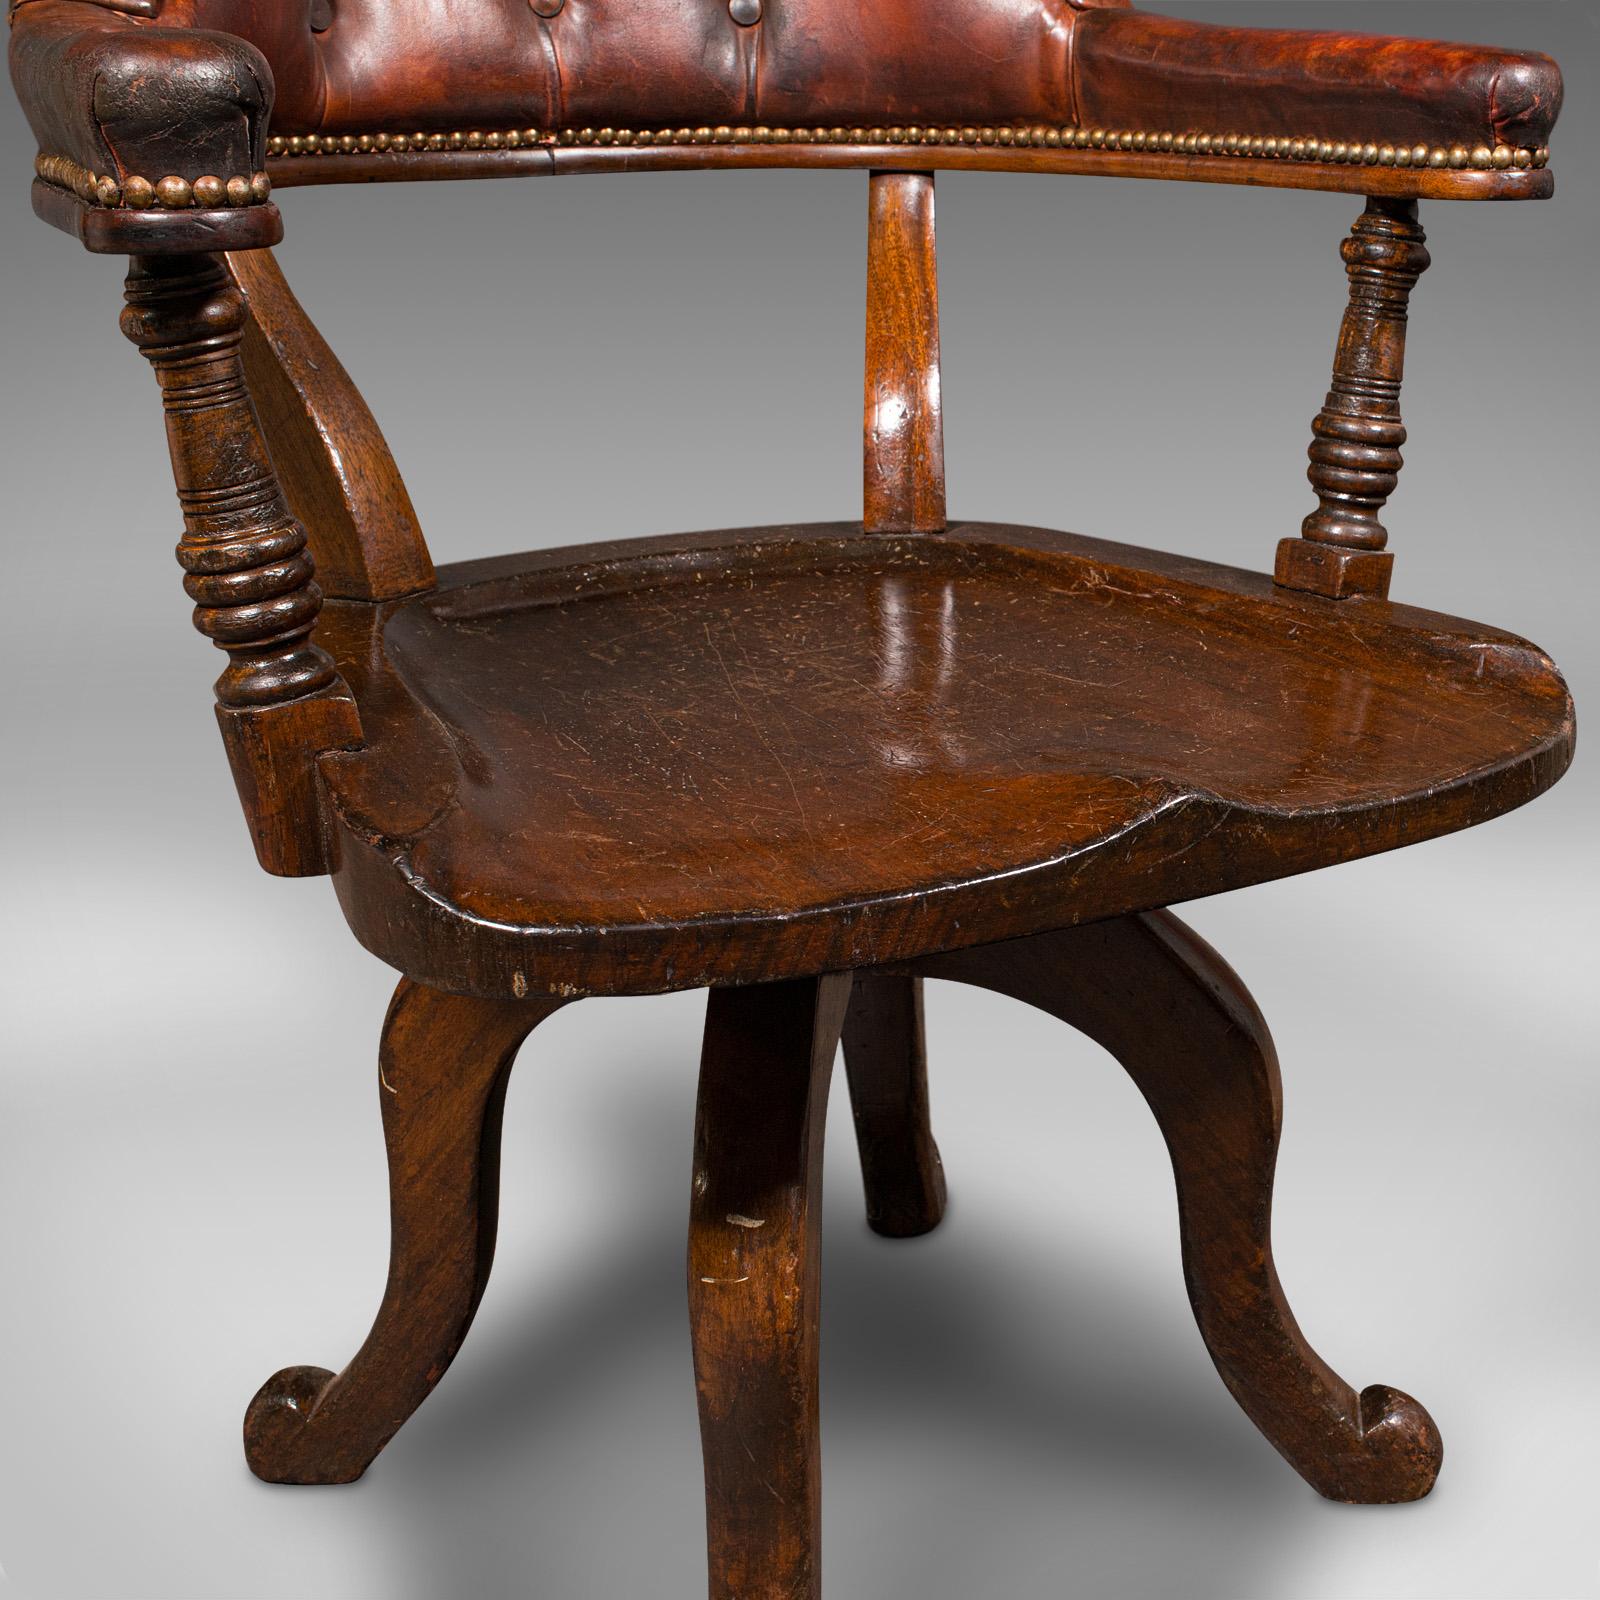 Antique Porter's Hall Chair, English, Leather, Rotary Desk Seat, Victorian, 1880 For Sale 6